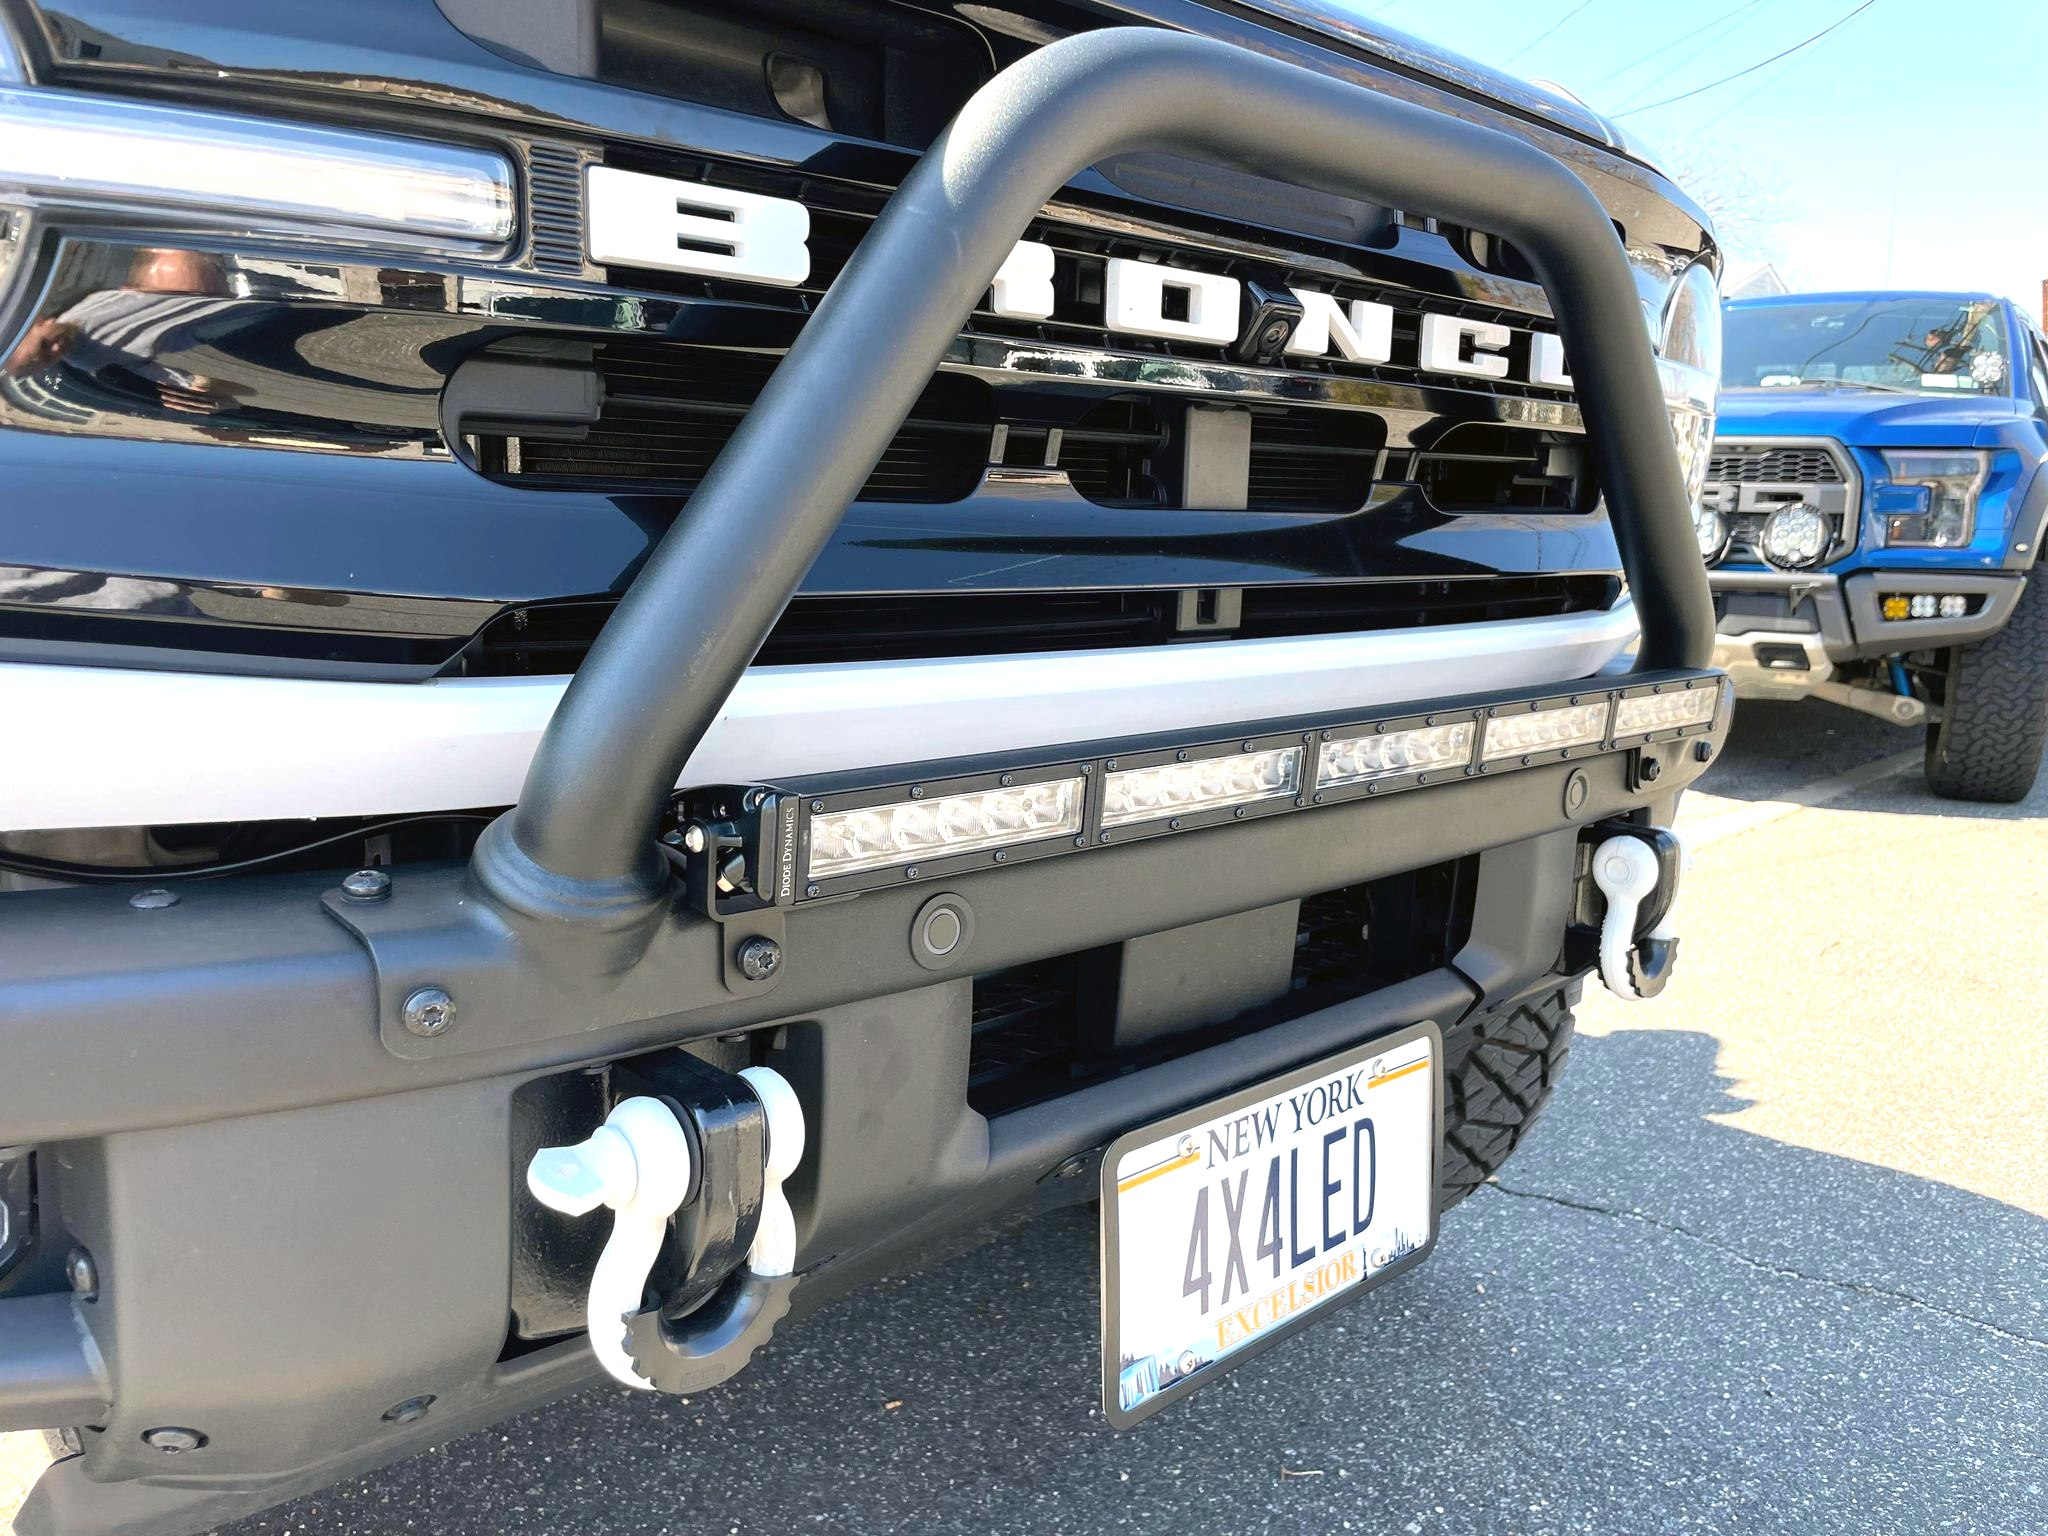 Ford Bronco Now Available: KR Off-Road 30" Light Bar Bumper Mount for 2021+ Ford Bronco 1647453394110